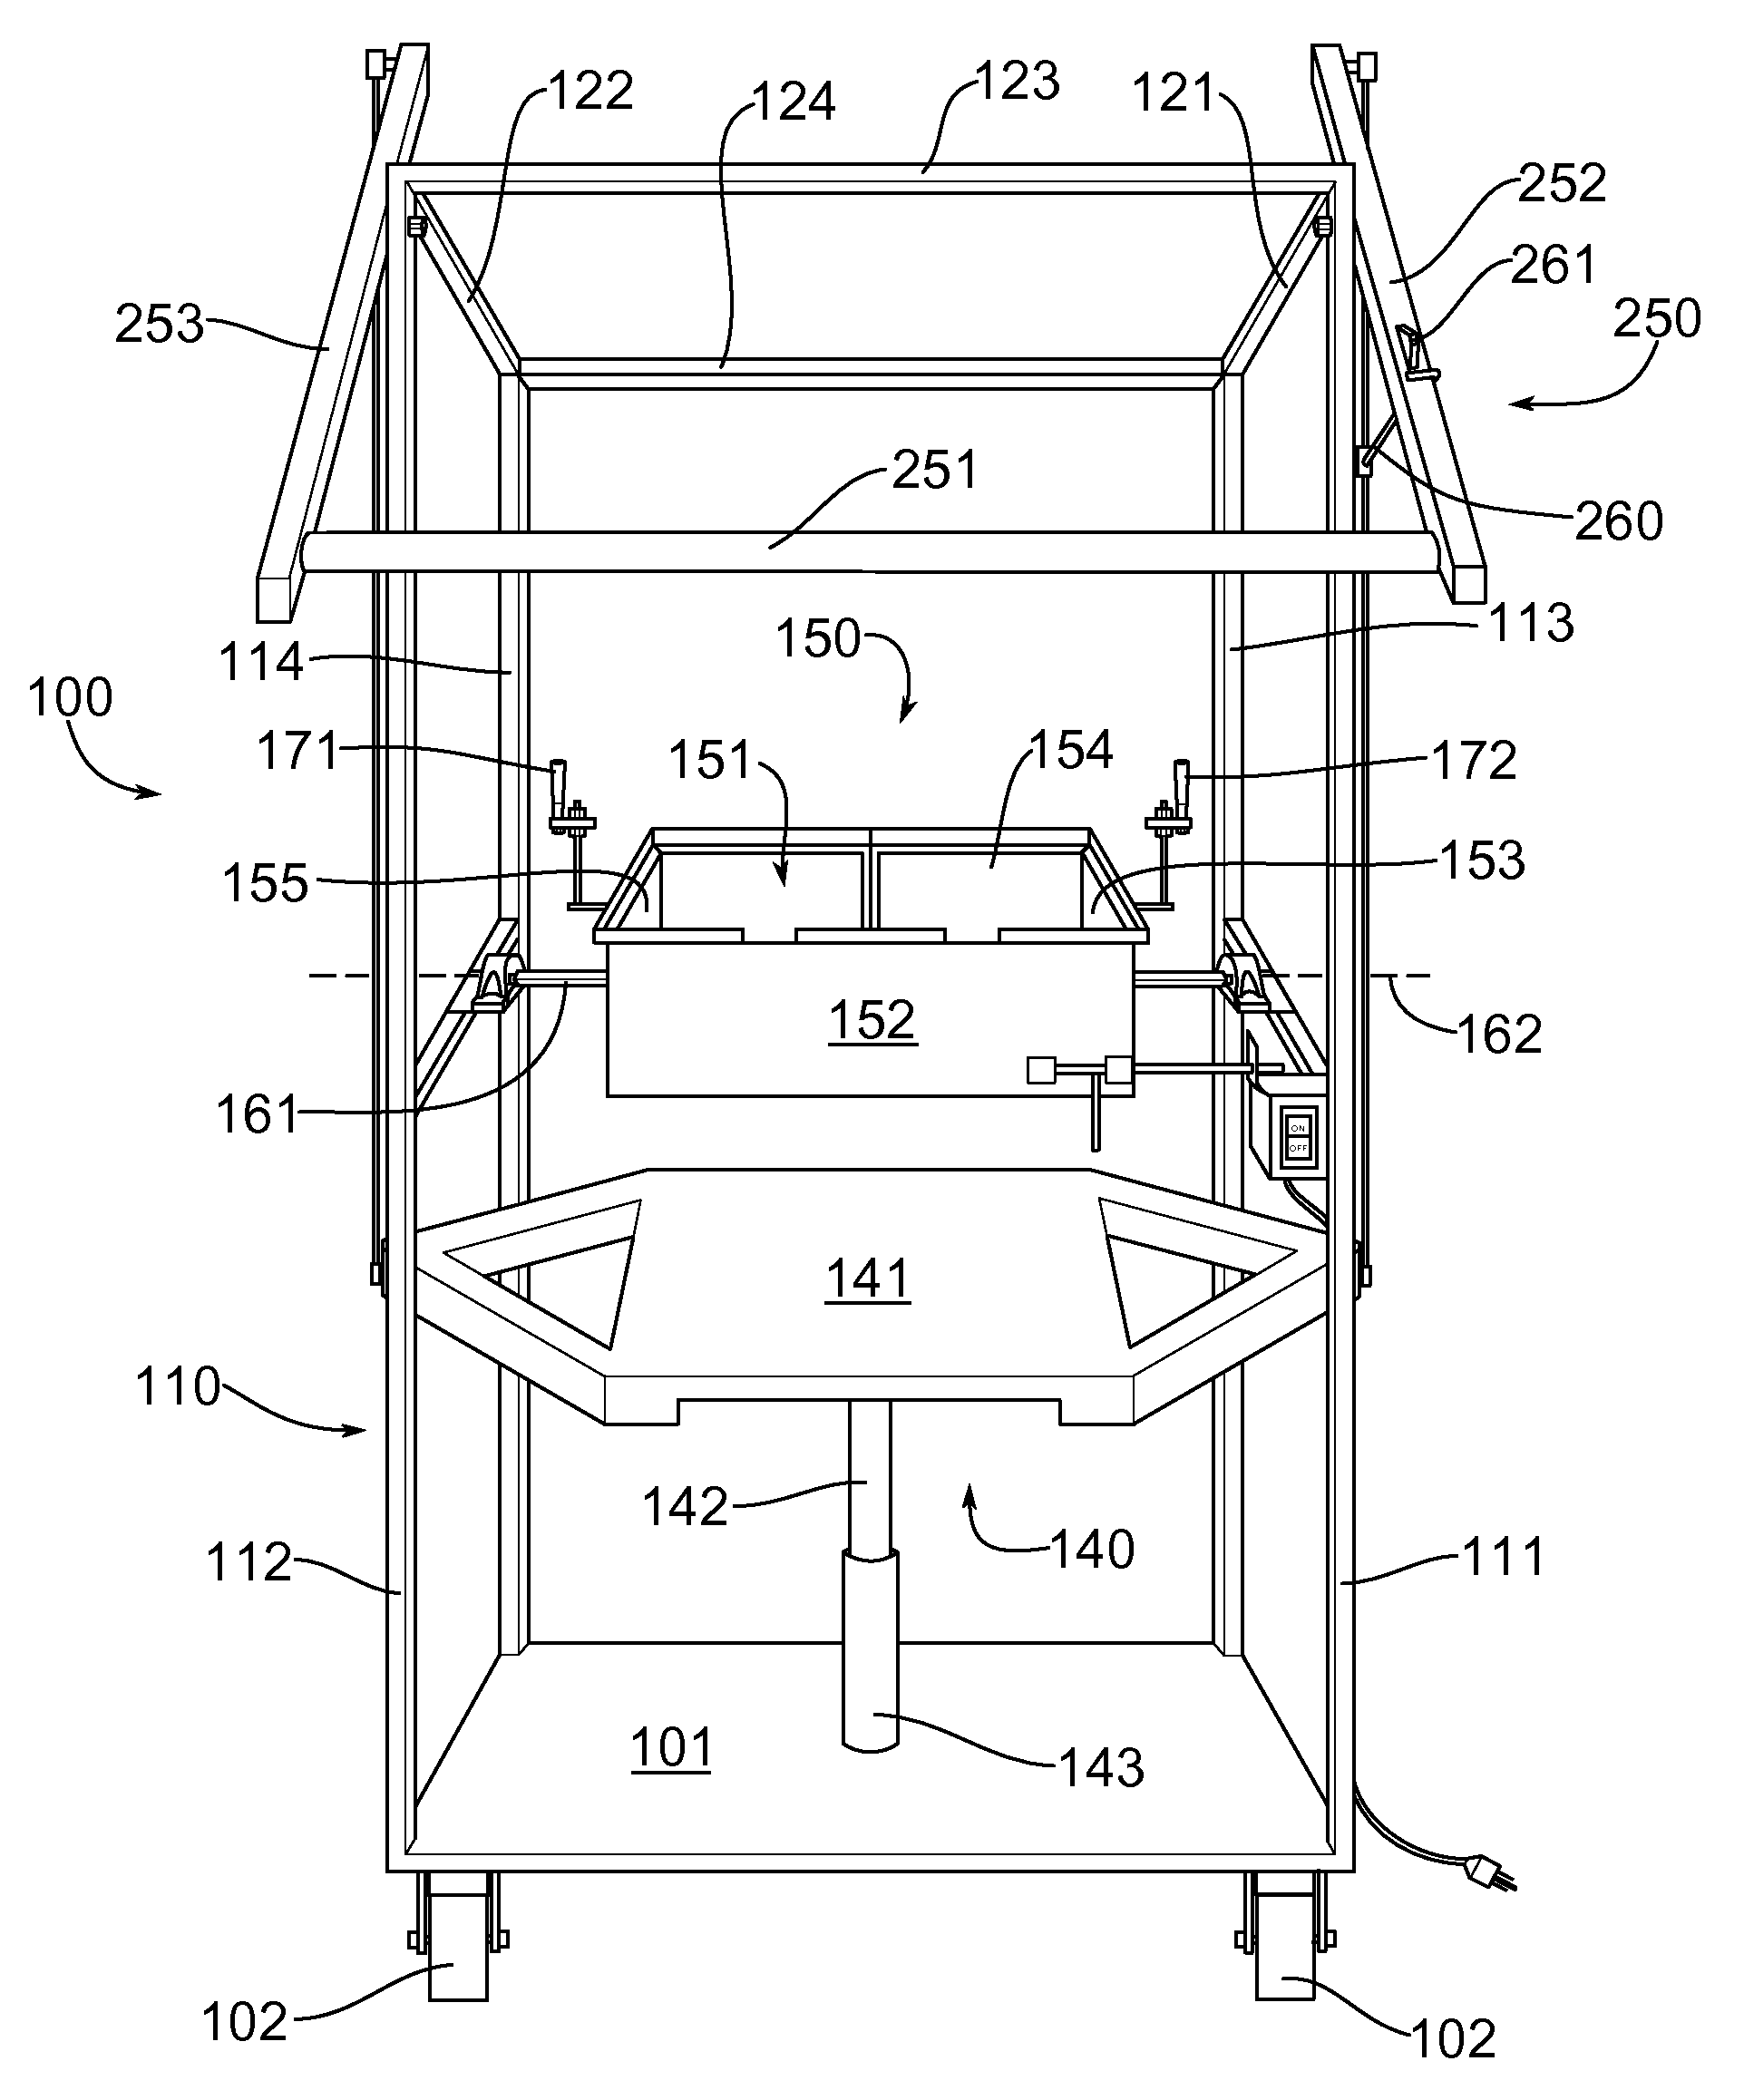 Portable egg candling and containment transfer apparatus and method